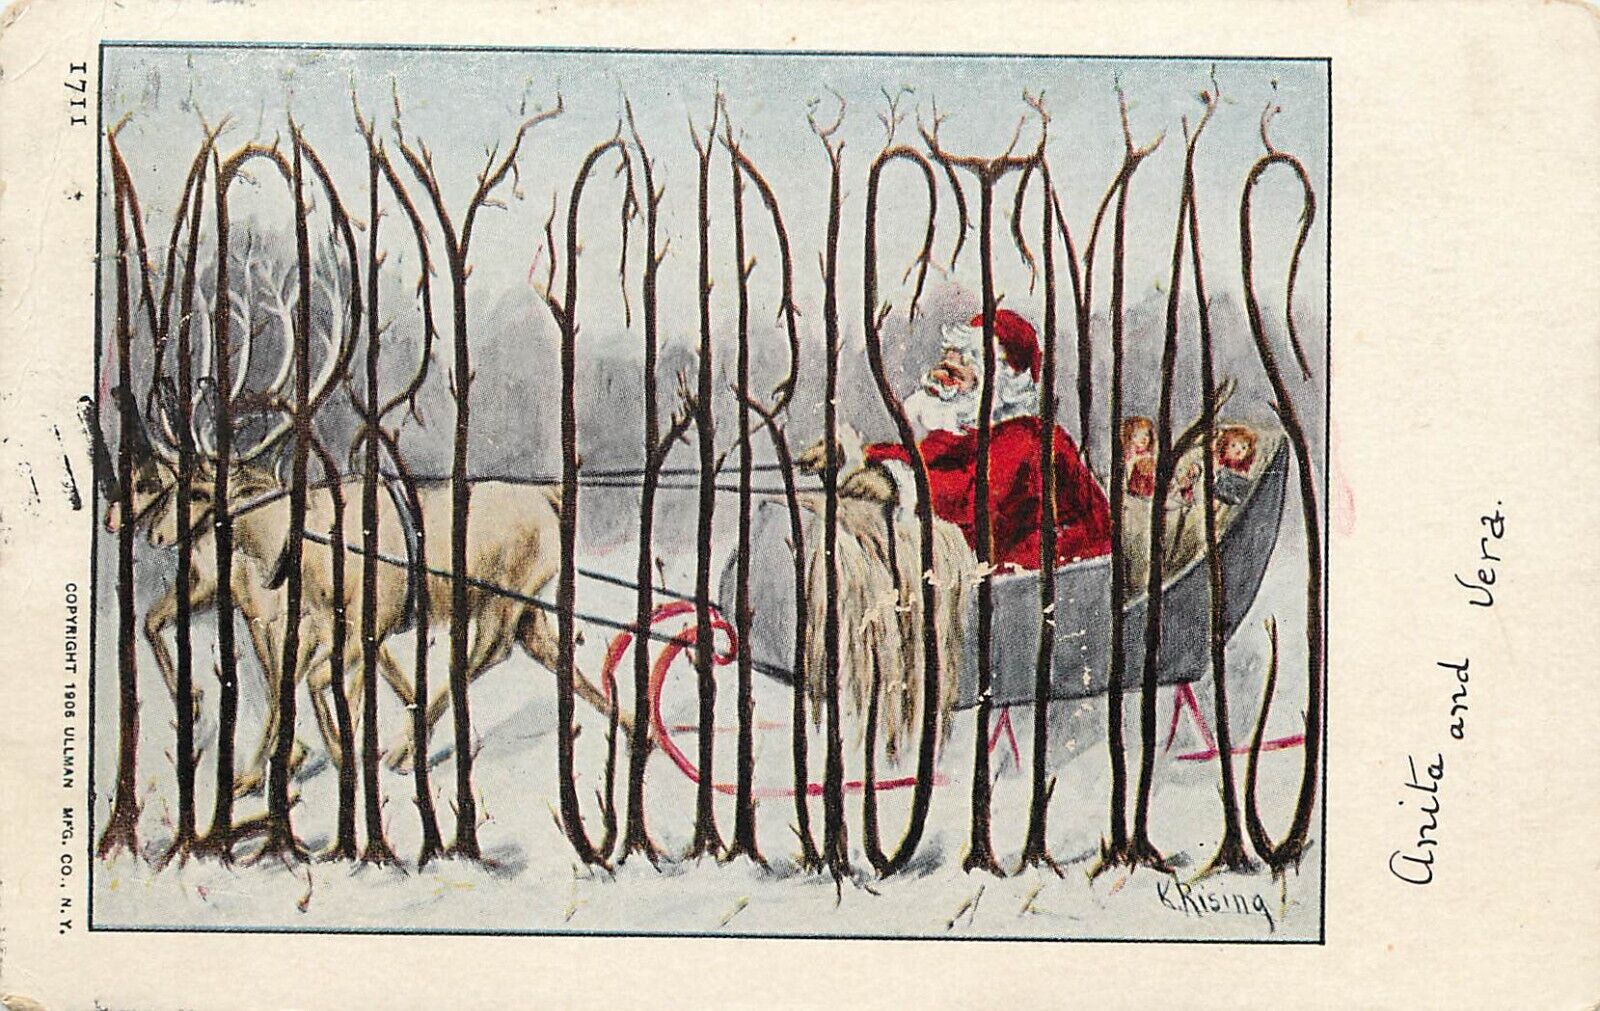 Merry Christmas Spelled With Trees Postcard Santa Claus Drives Sleigh K. Rising